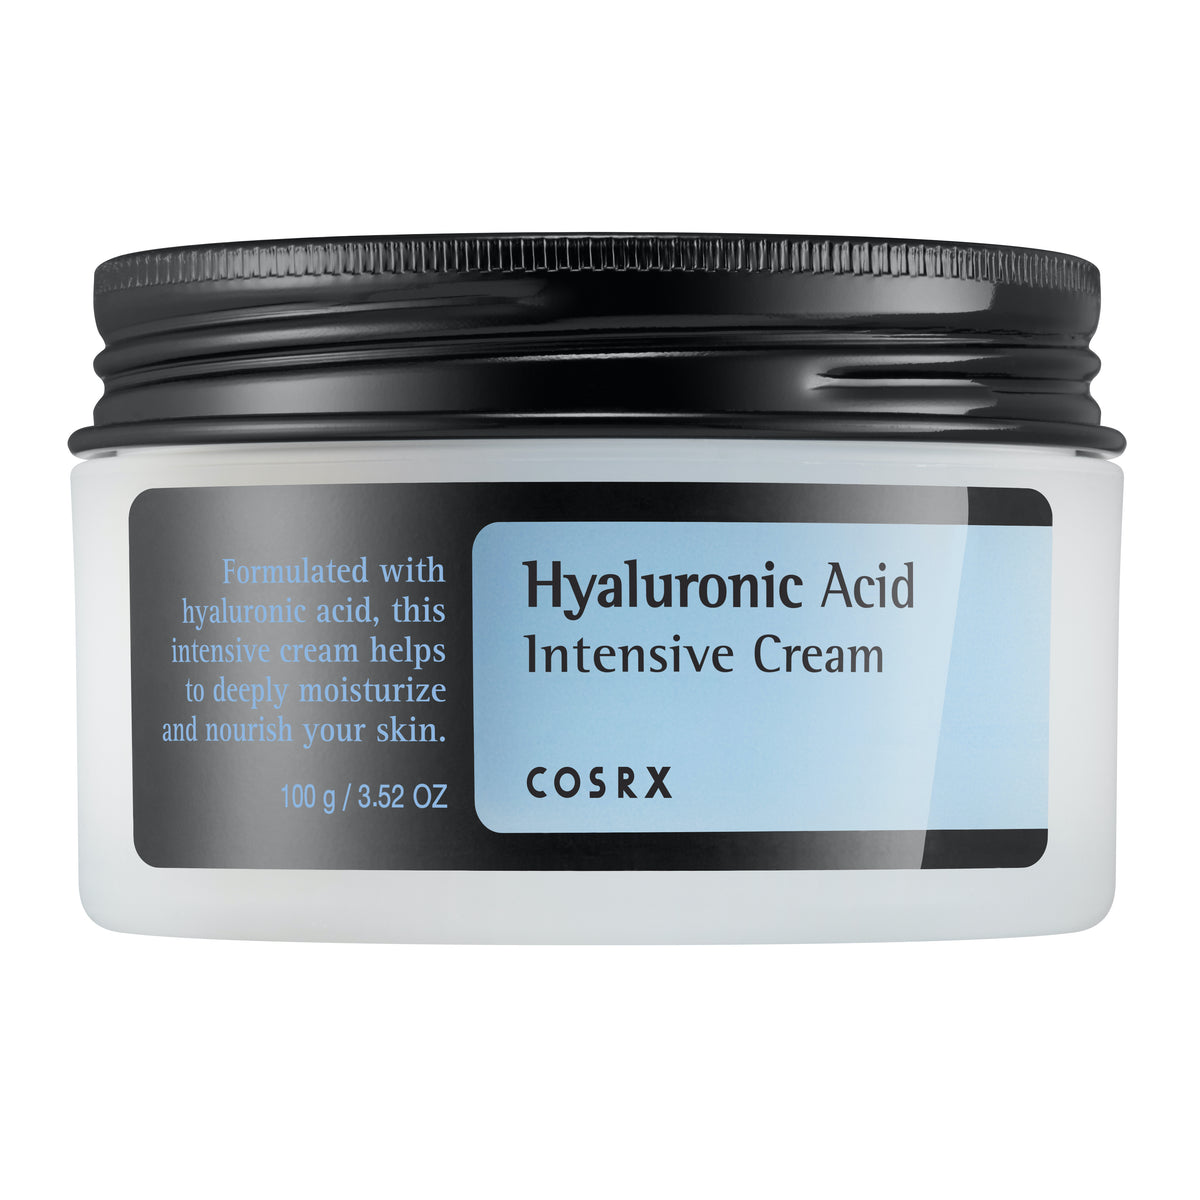 COSRX Hyaluronic Acid Intensive Cream at Socialite Beauty Canada